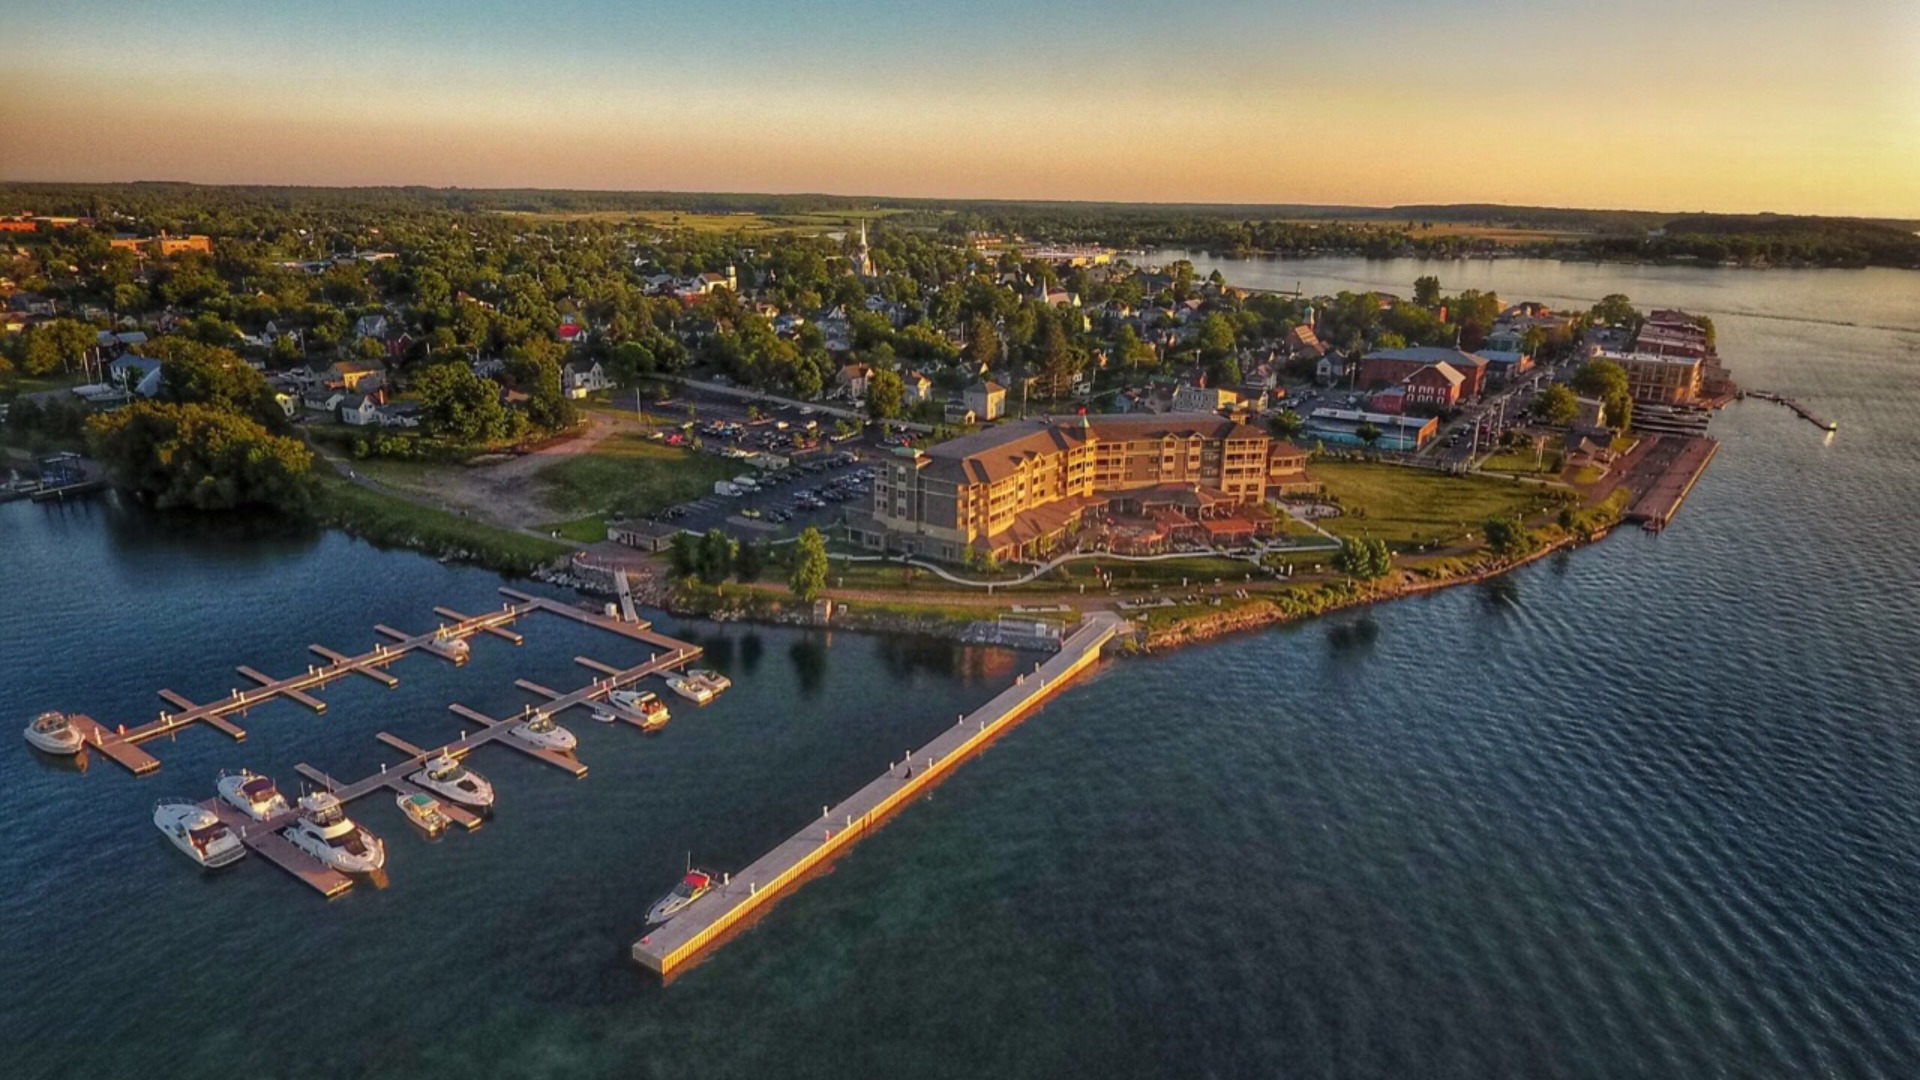 Islands Harbor Hotel Clayton NY on St. Lawrence River